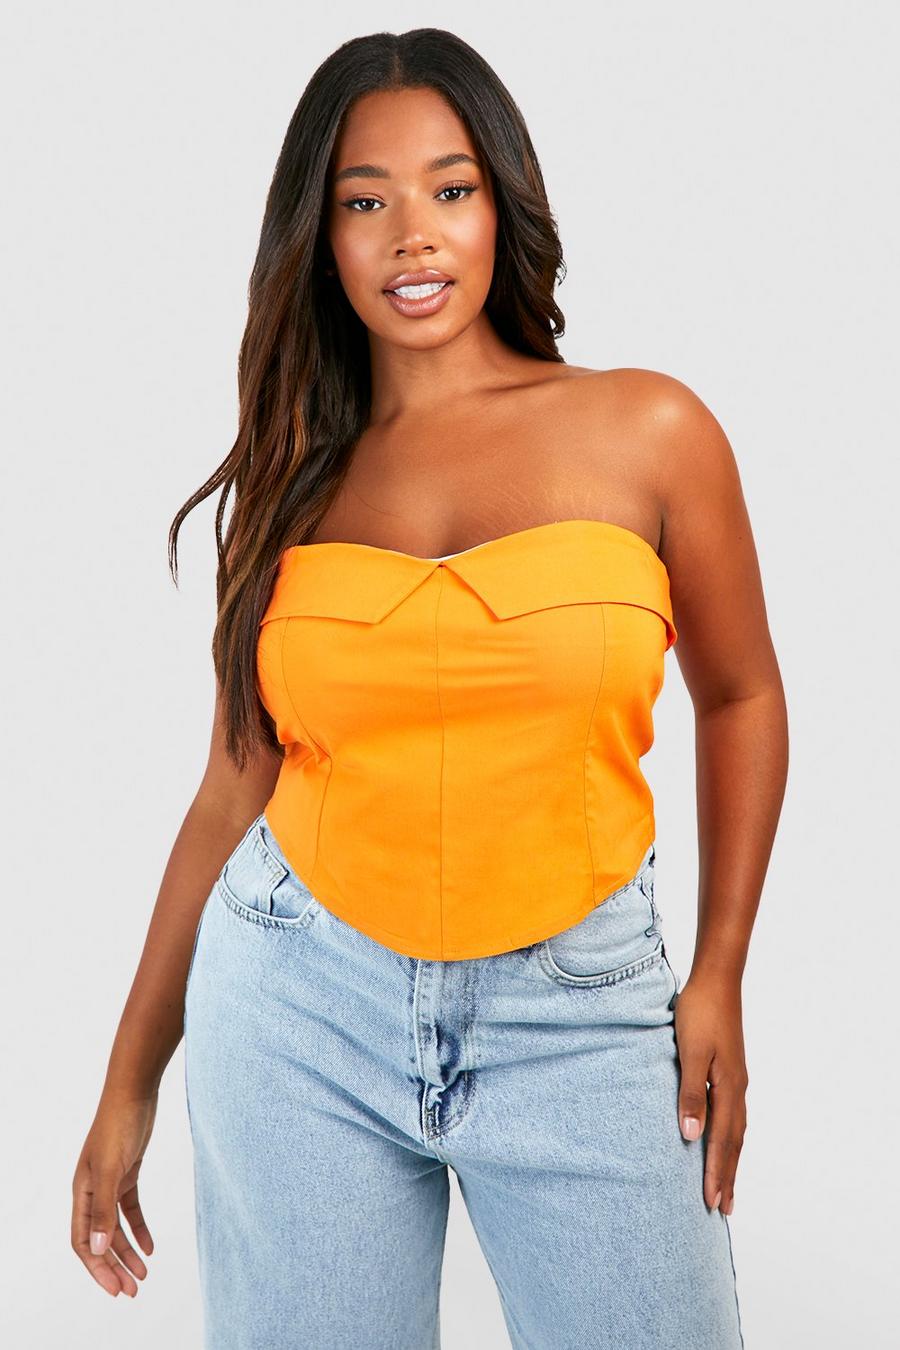 Where to Find Plus Size Corsets // Plus Size Corset Tops 